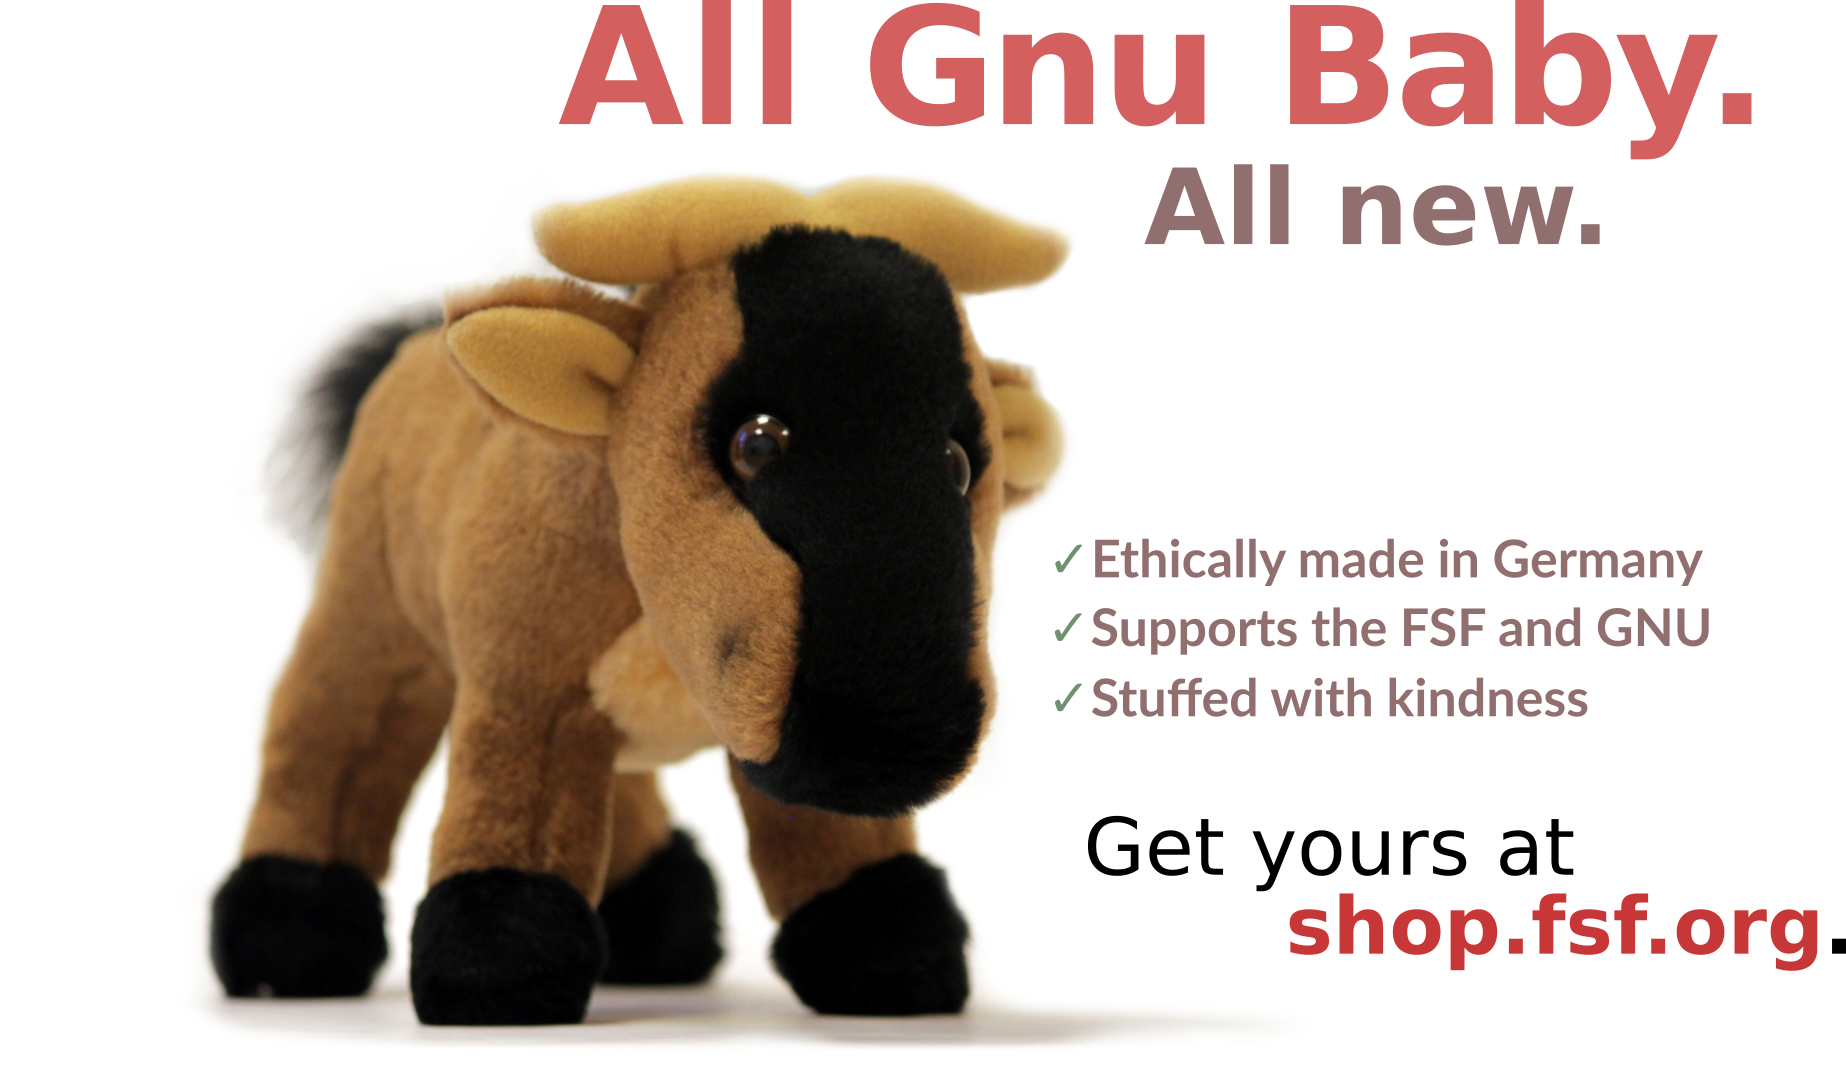 Image of the new baby gnu doll